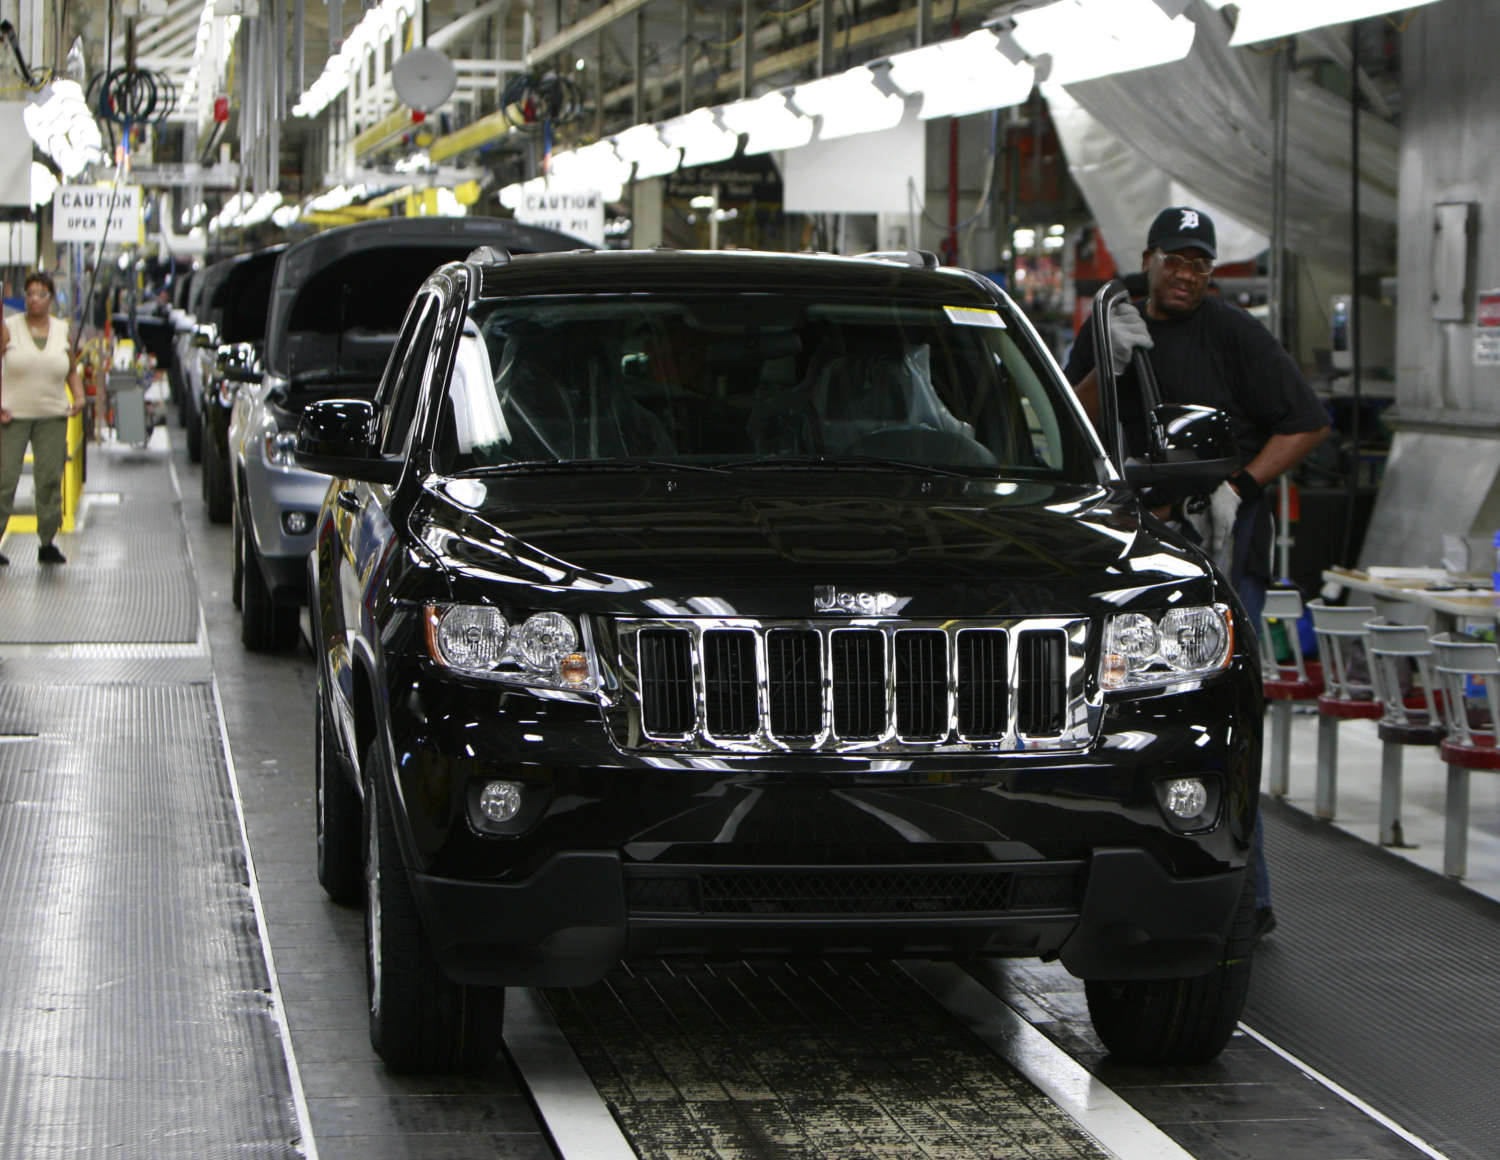 This Jeep is one of the worst SUVs that can cost a fortune